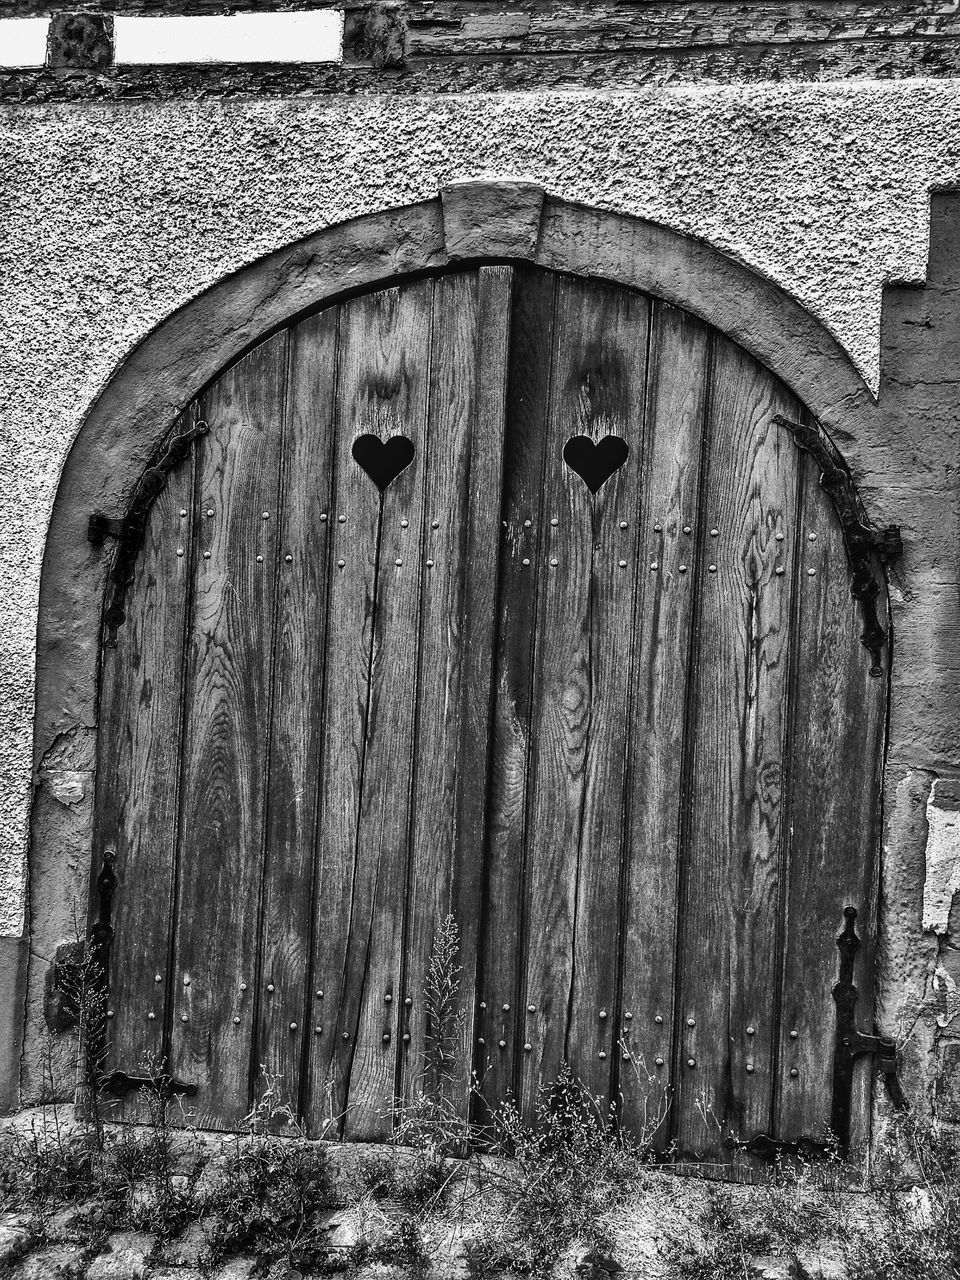 architecture, closed, built structure, door, safety, textured, protection, wood - material, arch, building exterior, entrance, wooden, outdoors, history, weathered, front door, obsolete, entryway, day, past